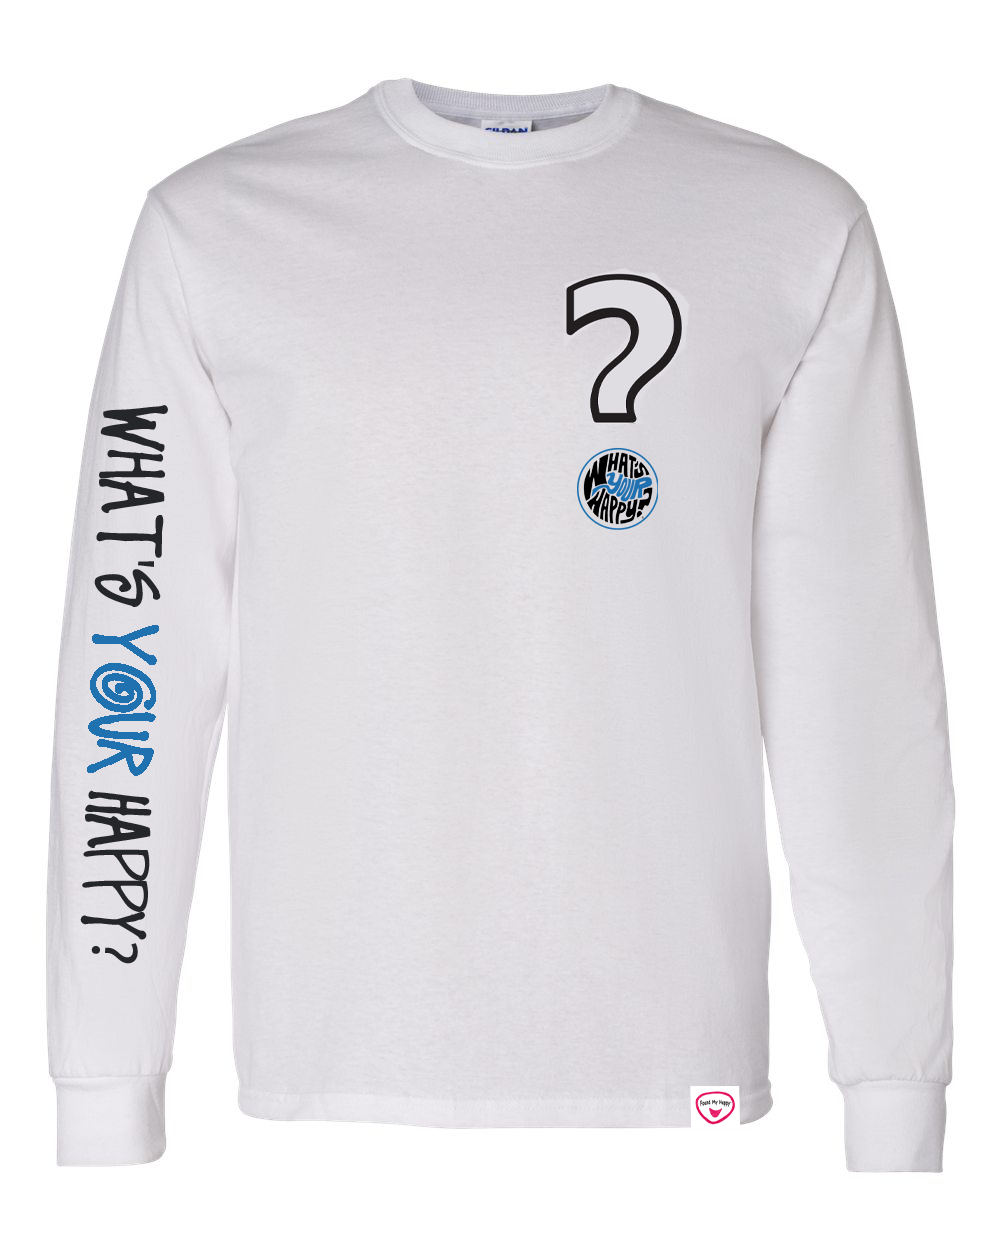 Found My Happy - WYH? White Long-sleeve front/back/sleeve Printed Tee - Found My Happy